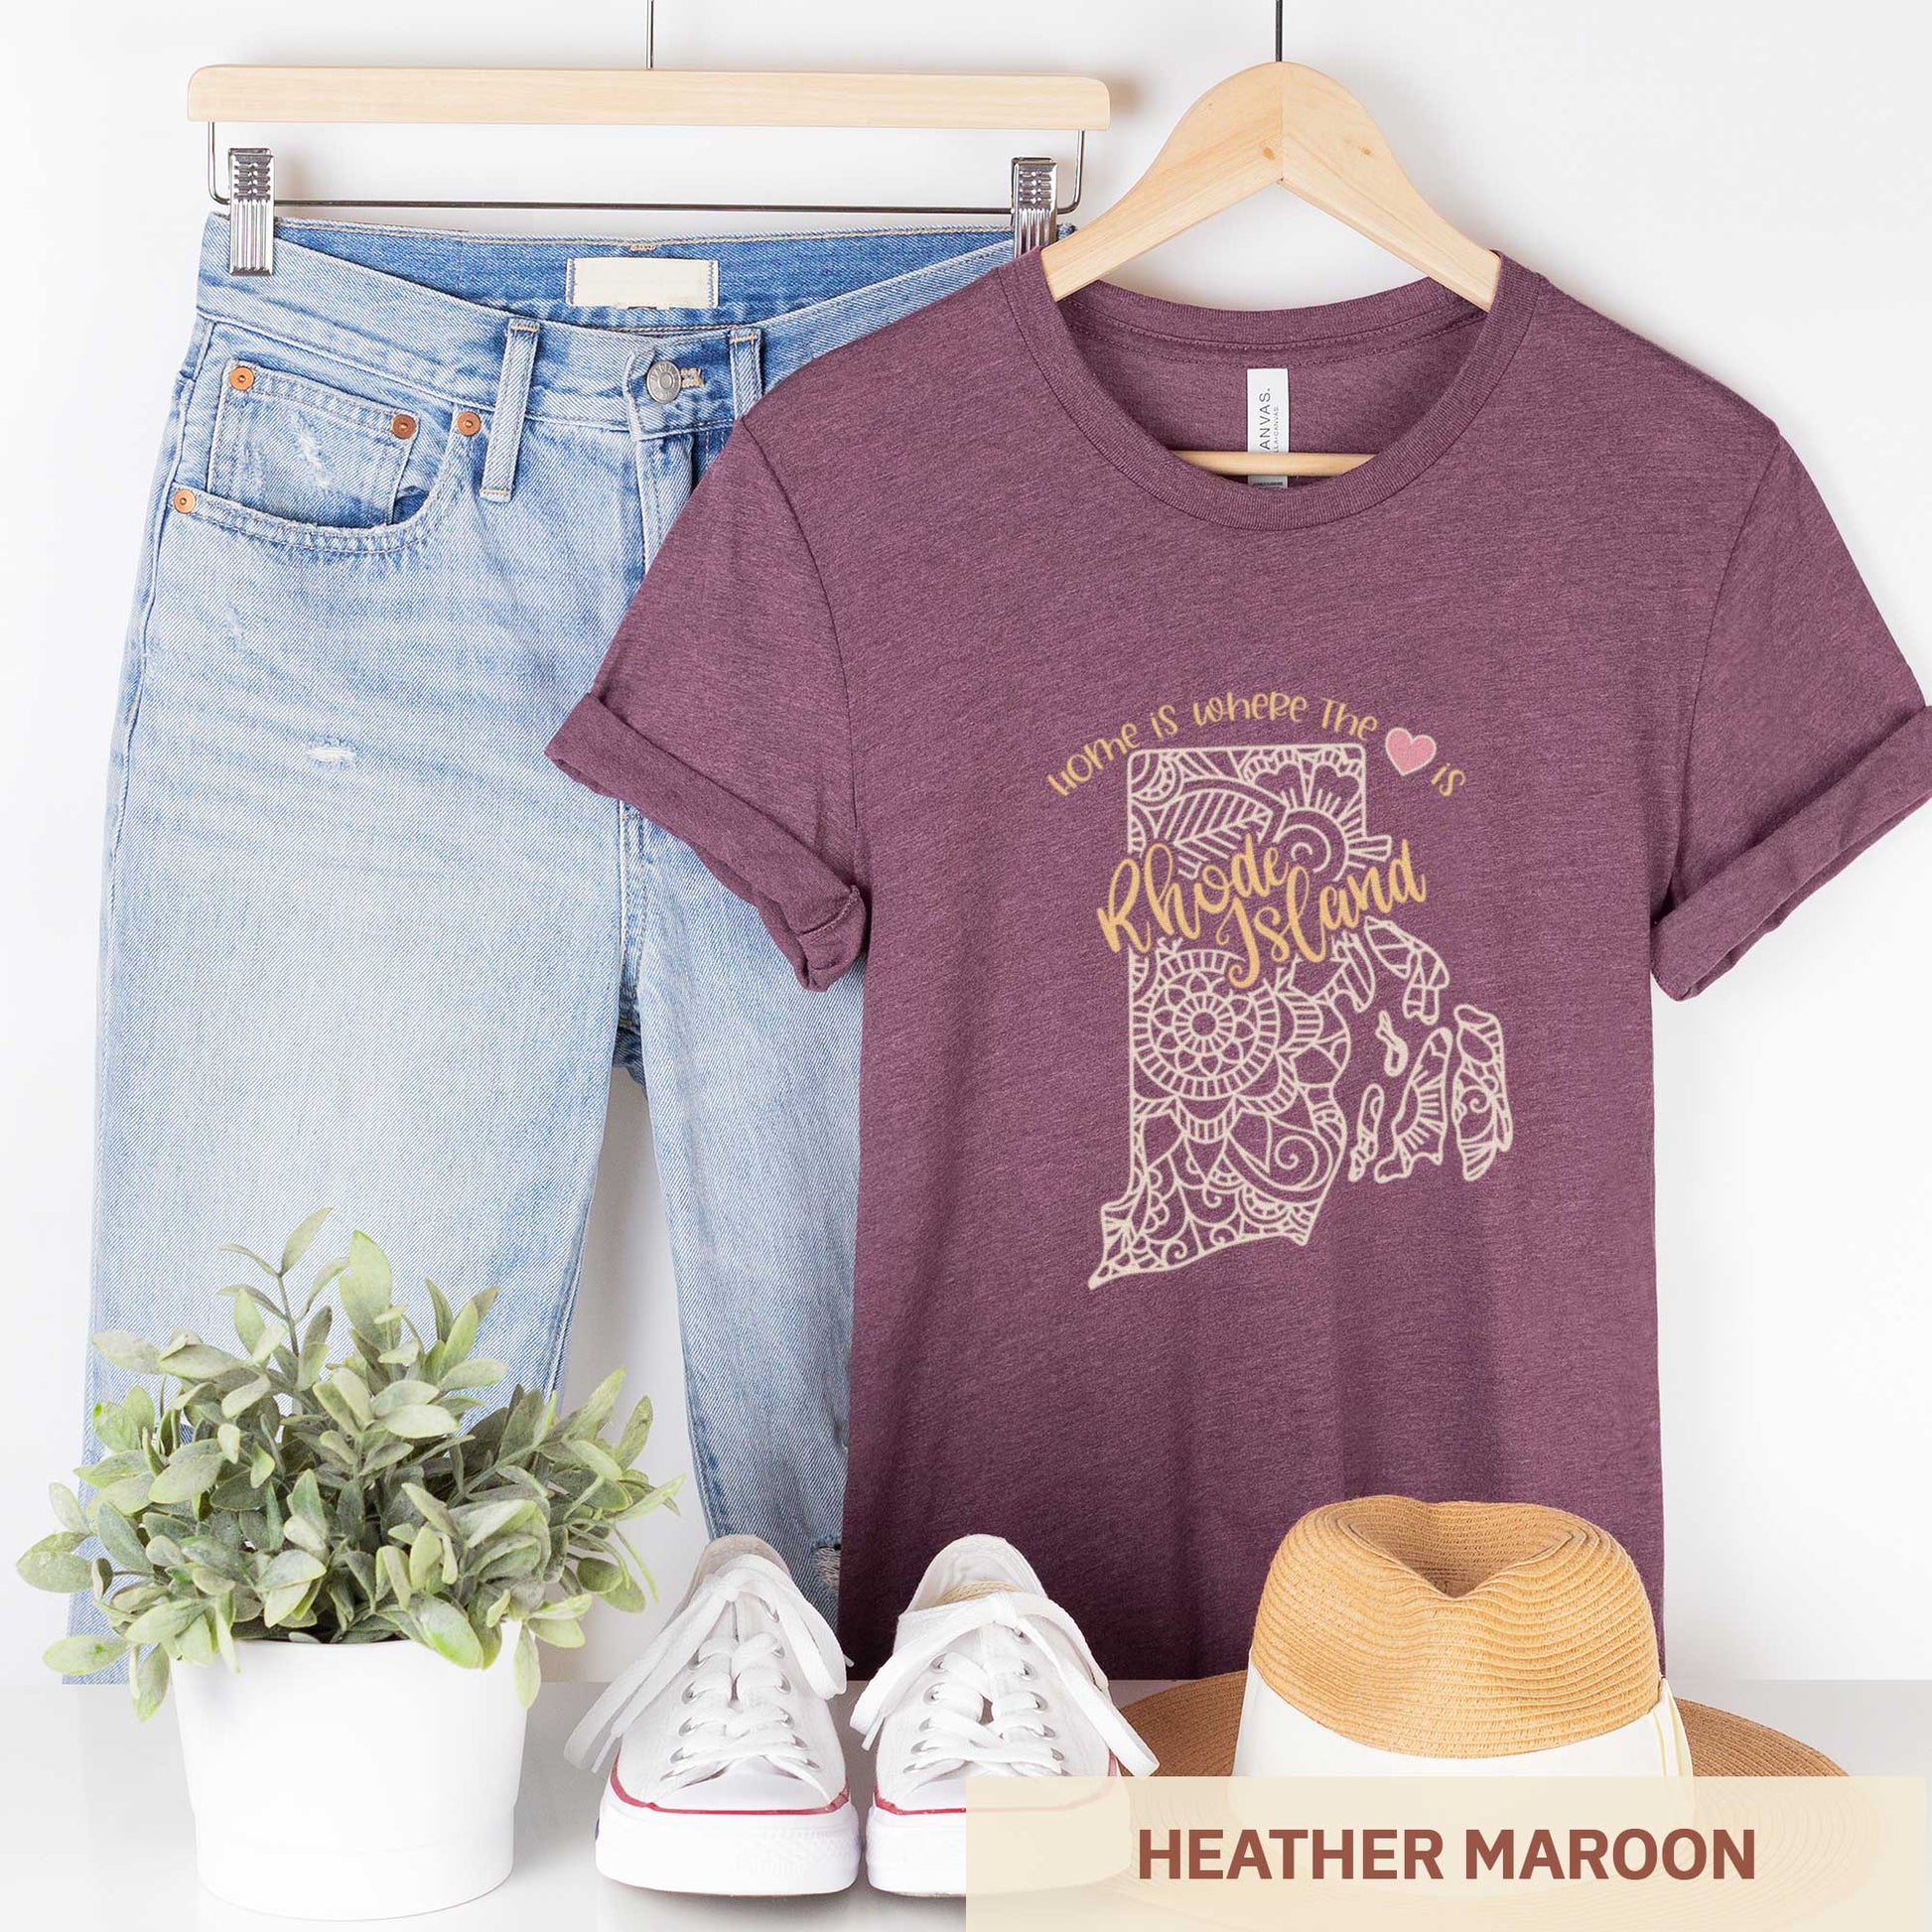 A hanging heather maroon Bella Canvas t-shirt featuring a mandala in the shape of Rhode Island with the words home is where the heart is.